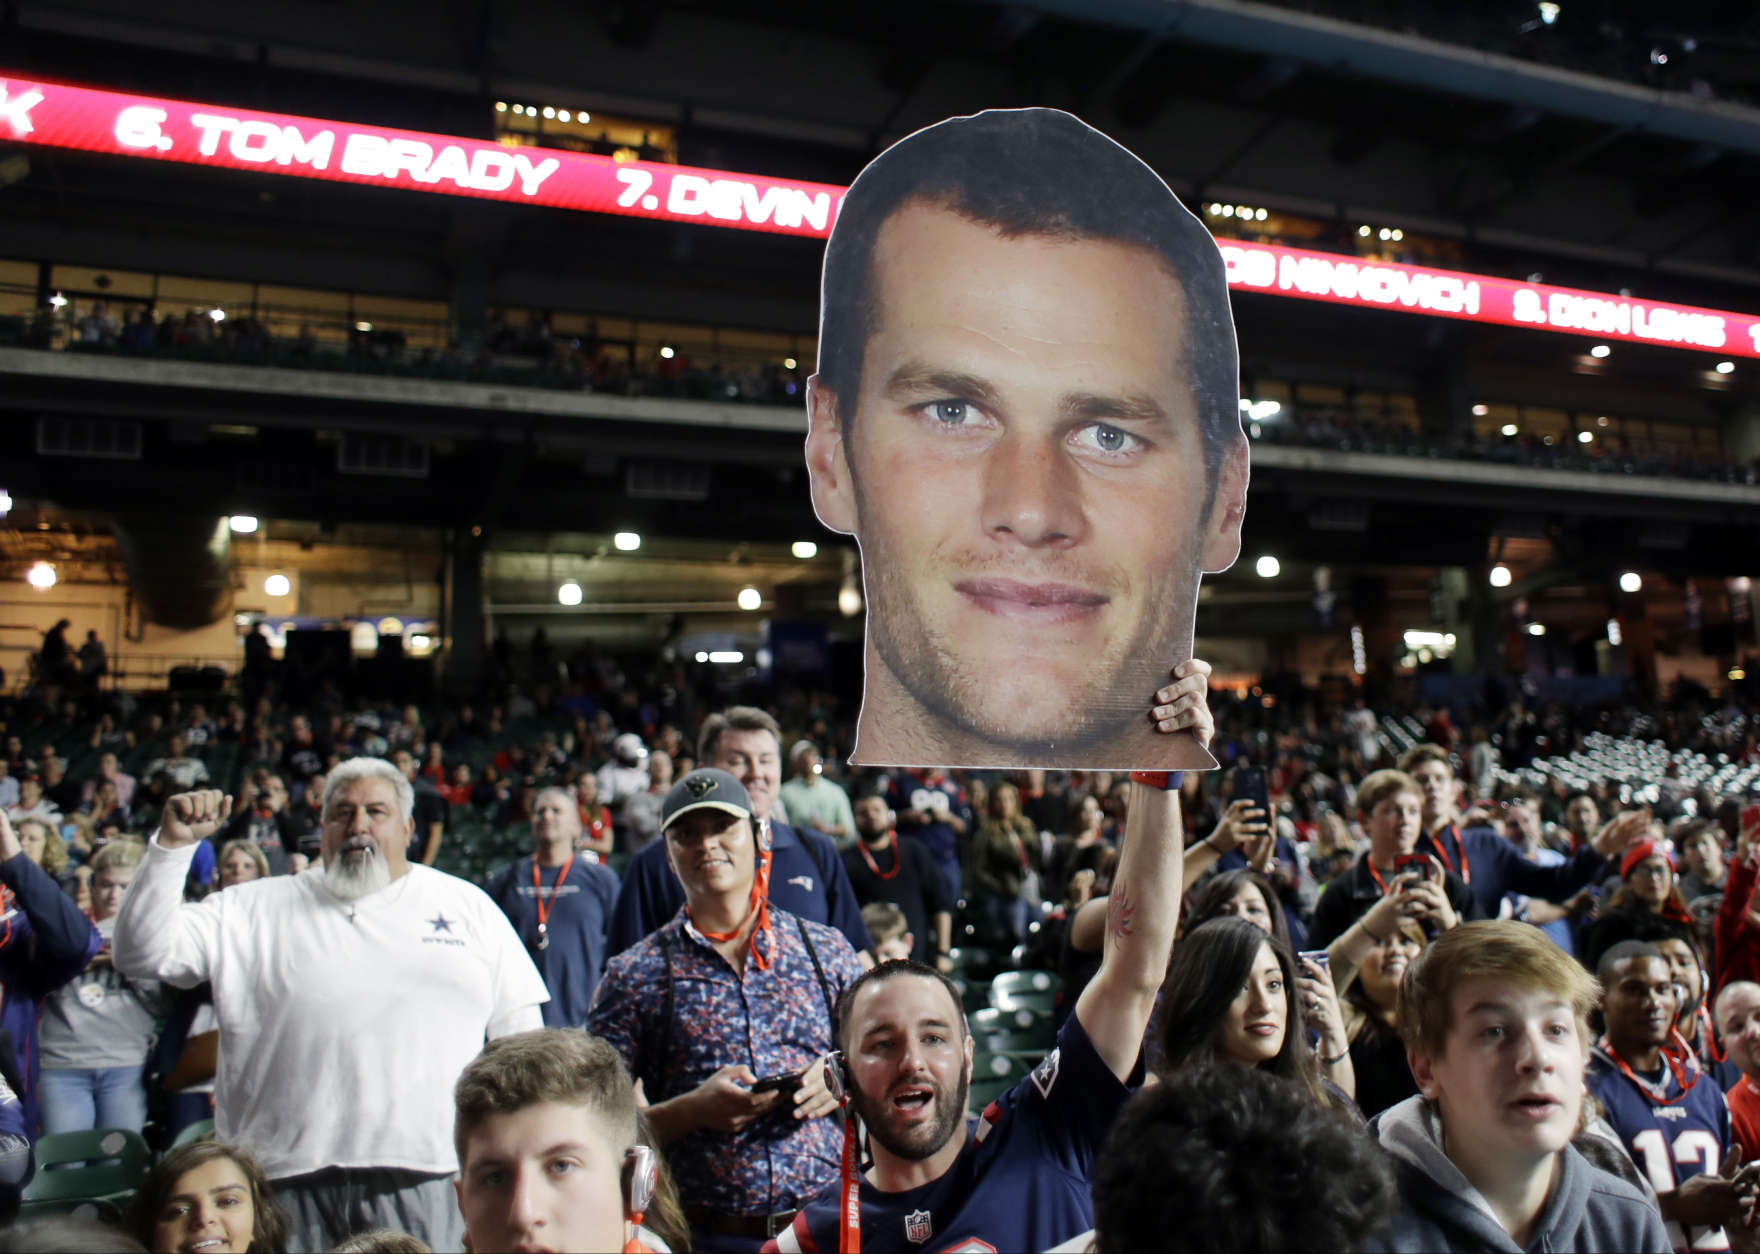 Fans watch the New England Patriots during opening night for the NFL Super Bowl 51 football game at Minute Maid Park Monday, Jan. 30, 2017, in Houston. (AP Photo/Eric Gay)